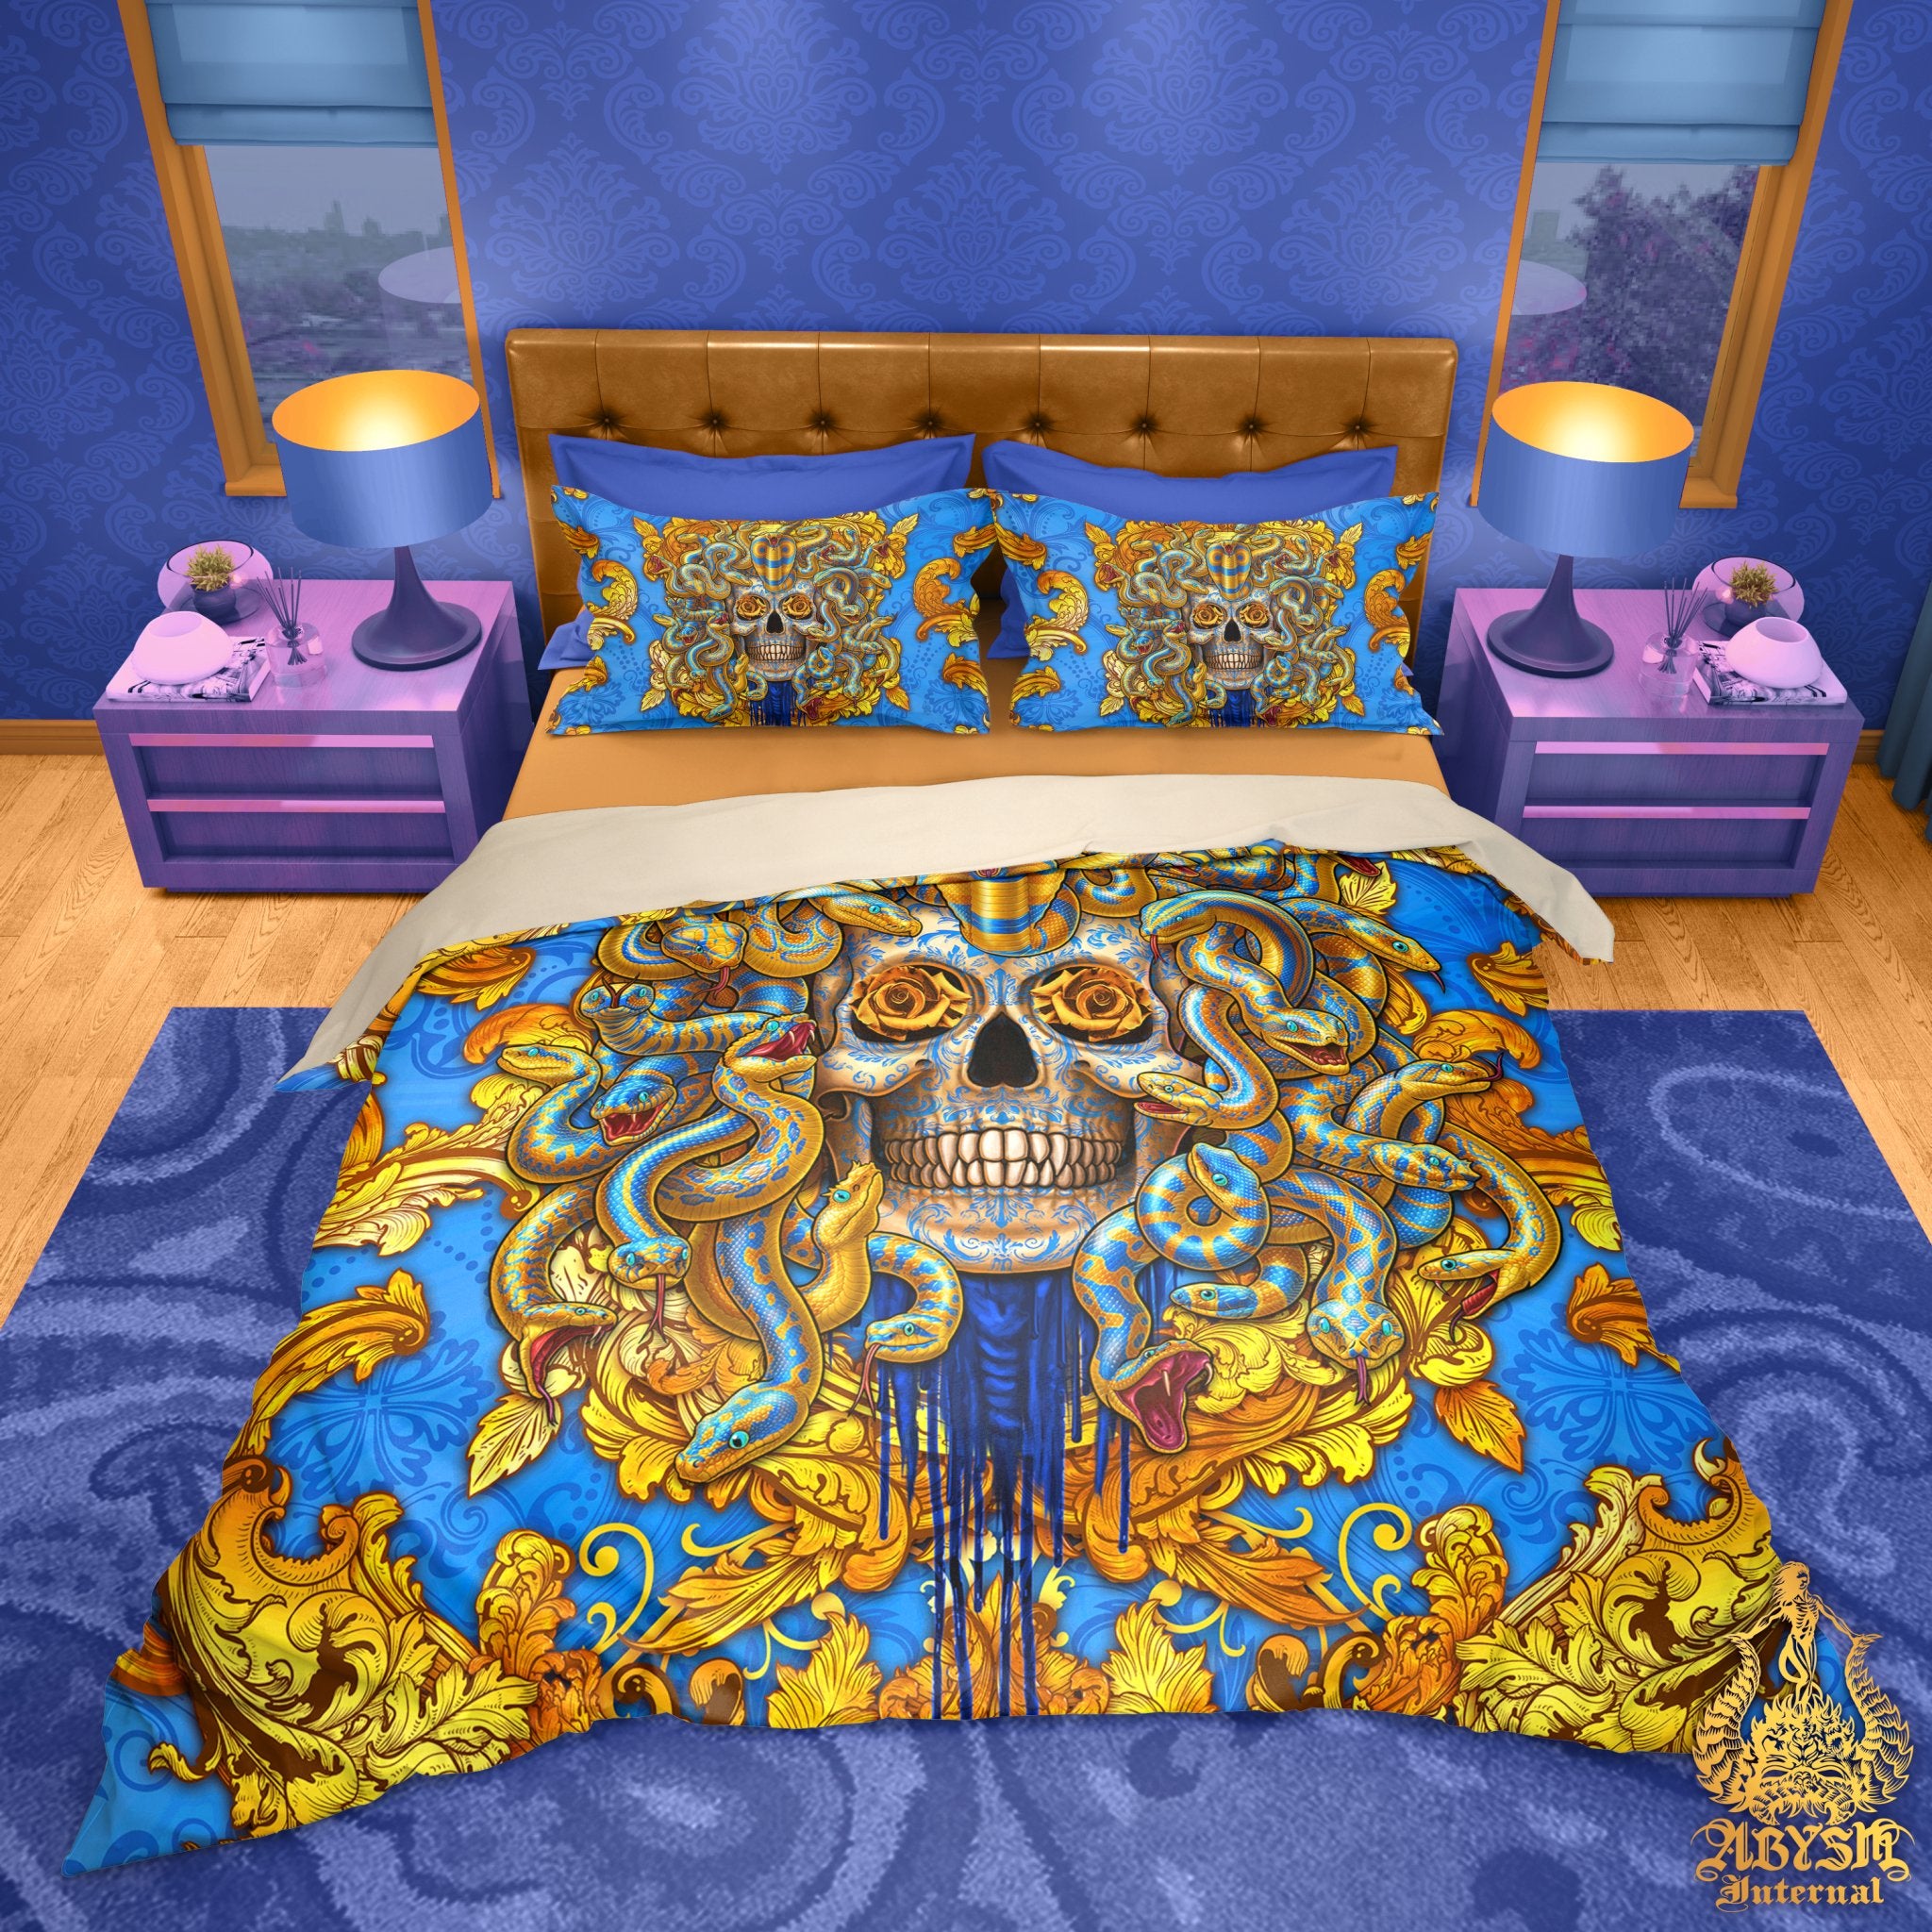 Medusa Comforter or Duvet, Indie Bed Cover, Victorian Bedroom Decor, King, Queen & Twin Bedding Set, Ecclectic Skull Art - Cyan Blue and Gold, 2 Faces - Abysm Internal